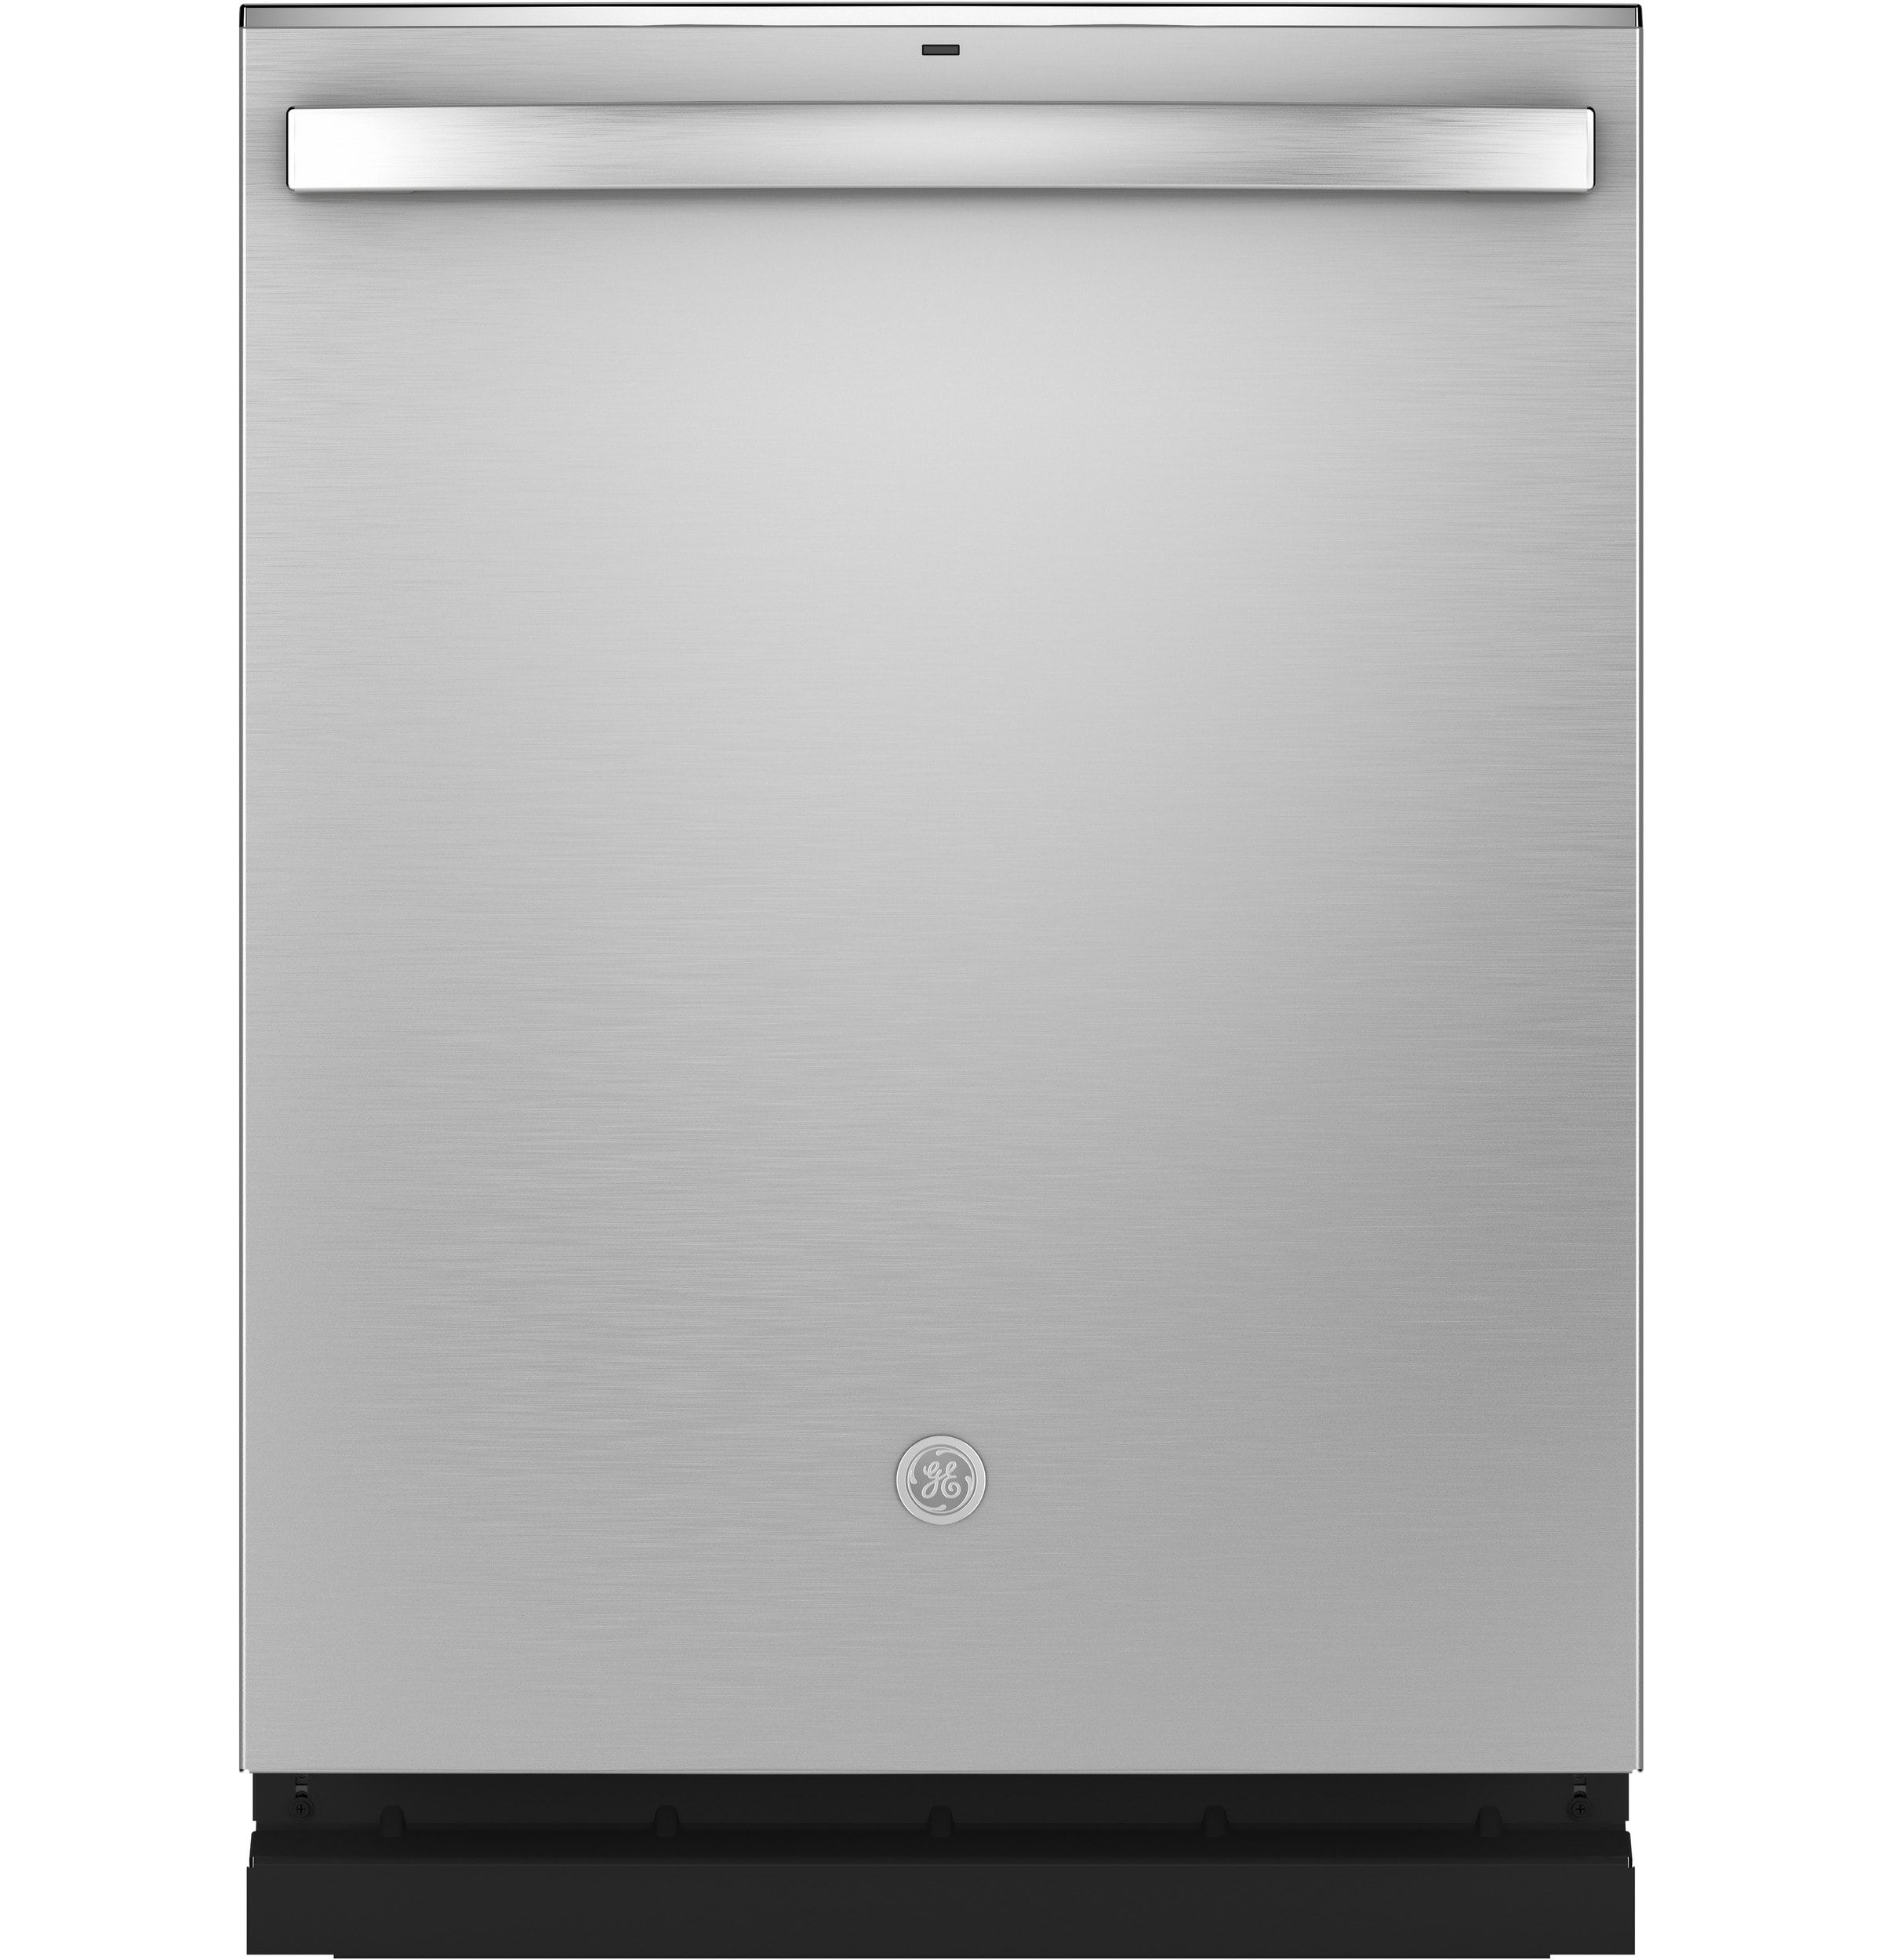 GE Dry Boost Built-In Dishwasher 